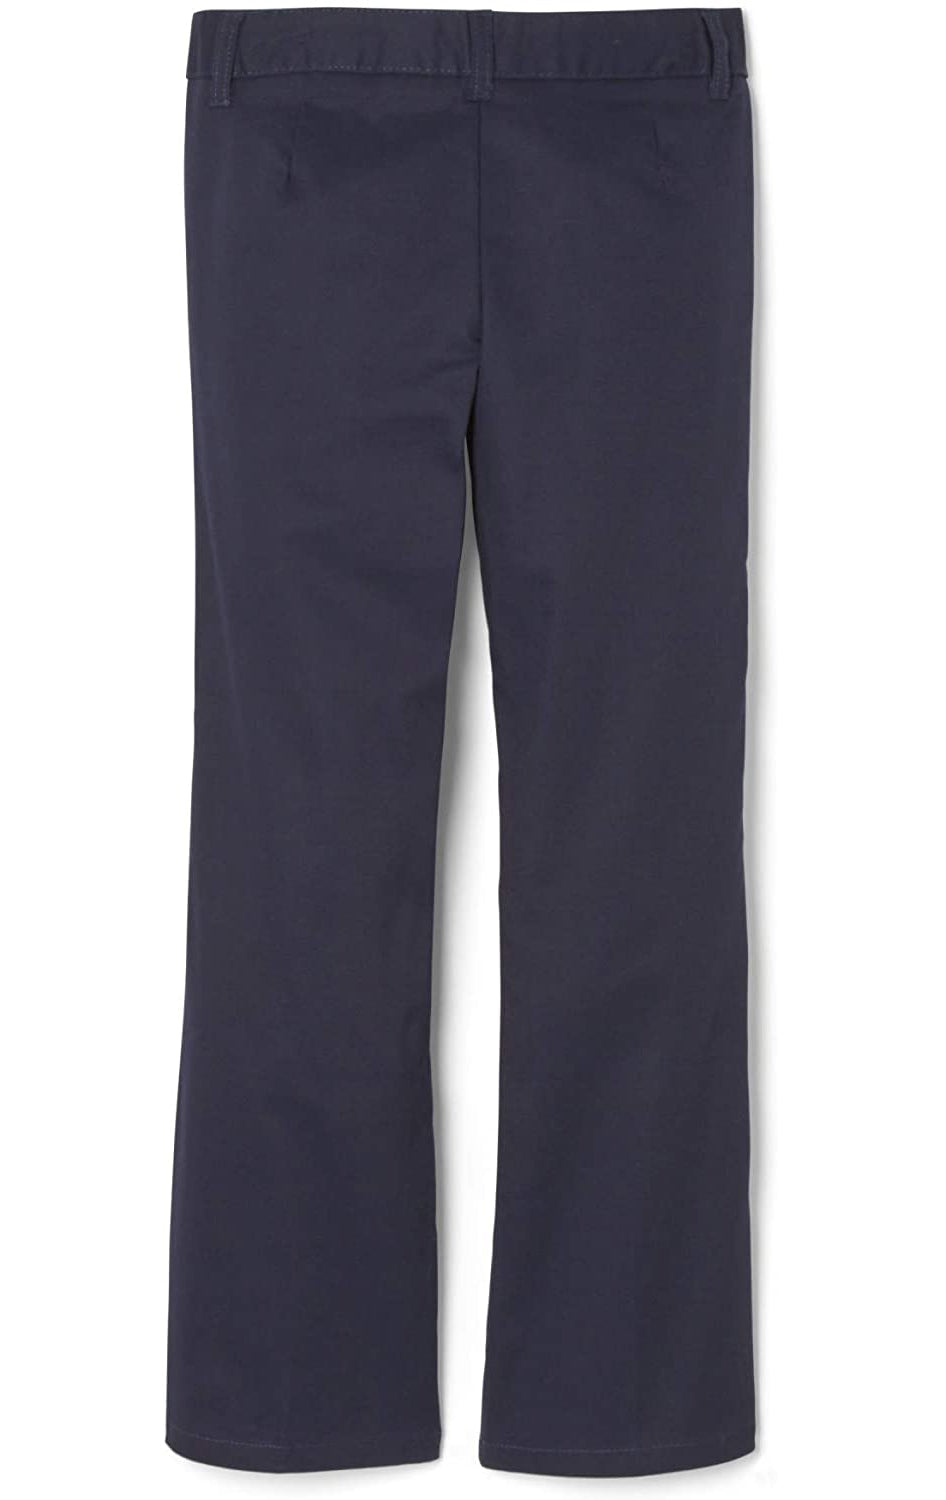 French Toast Girls 7-16 Slim Bootcut Pant